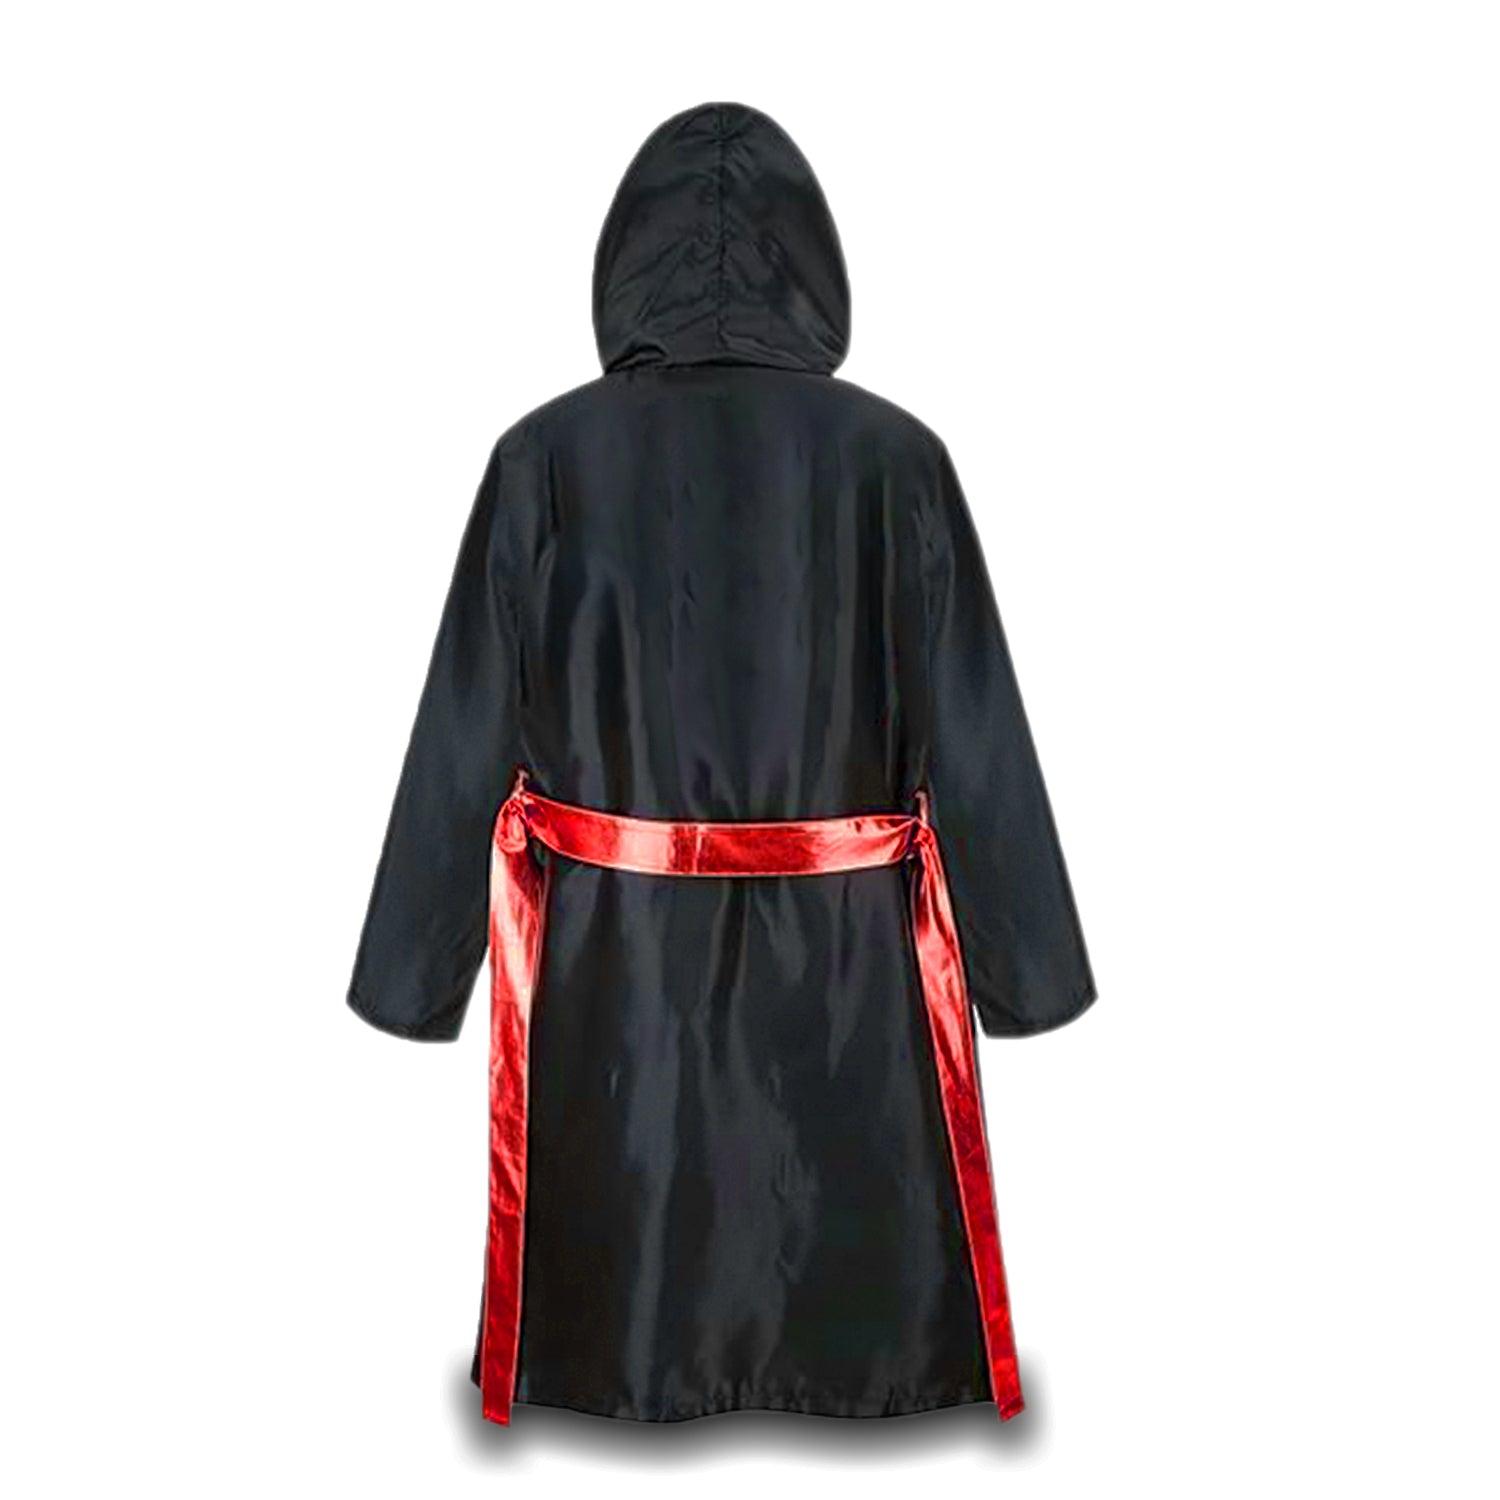 RingMaster Sports Champion Series Boxing Fight Robe Black & Red Gown Image 4